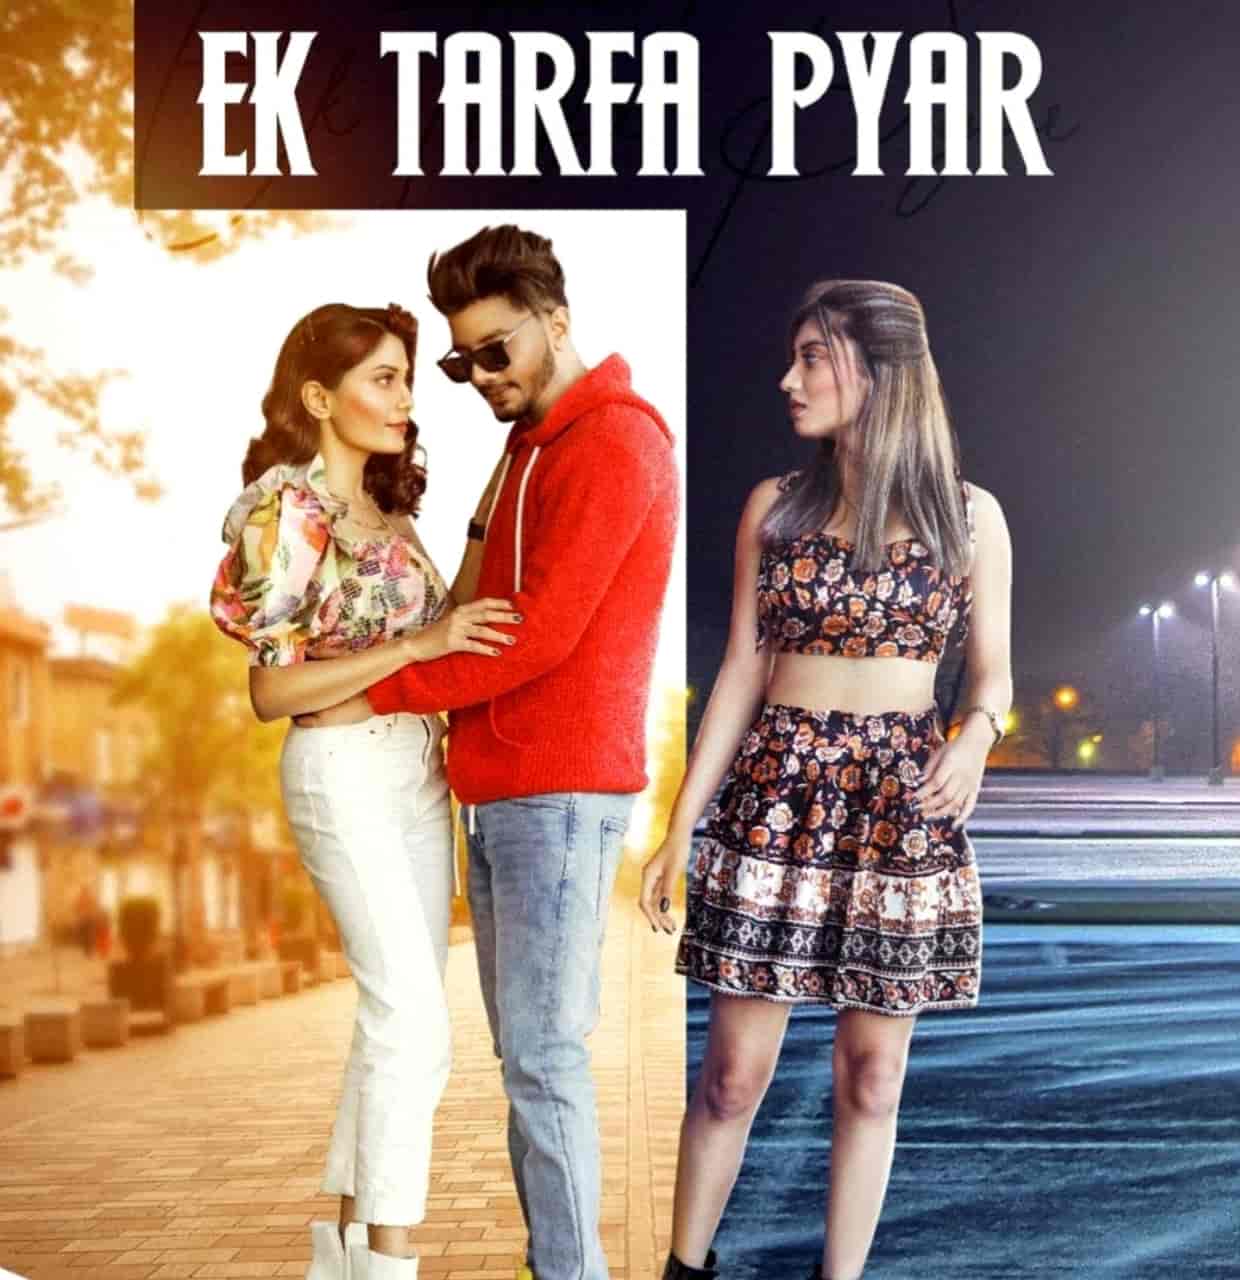 A very beautiful one sided love song which is titled Ek Tarfa Pyar has released sung in the melodious voice of Srishti Bhandari.